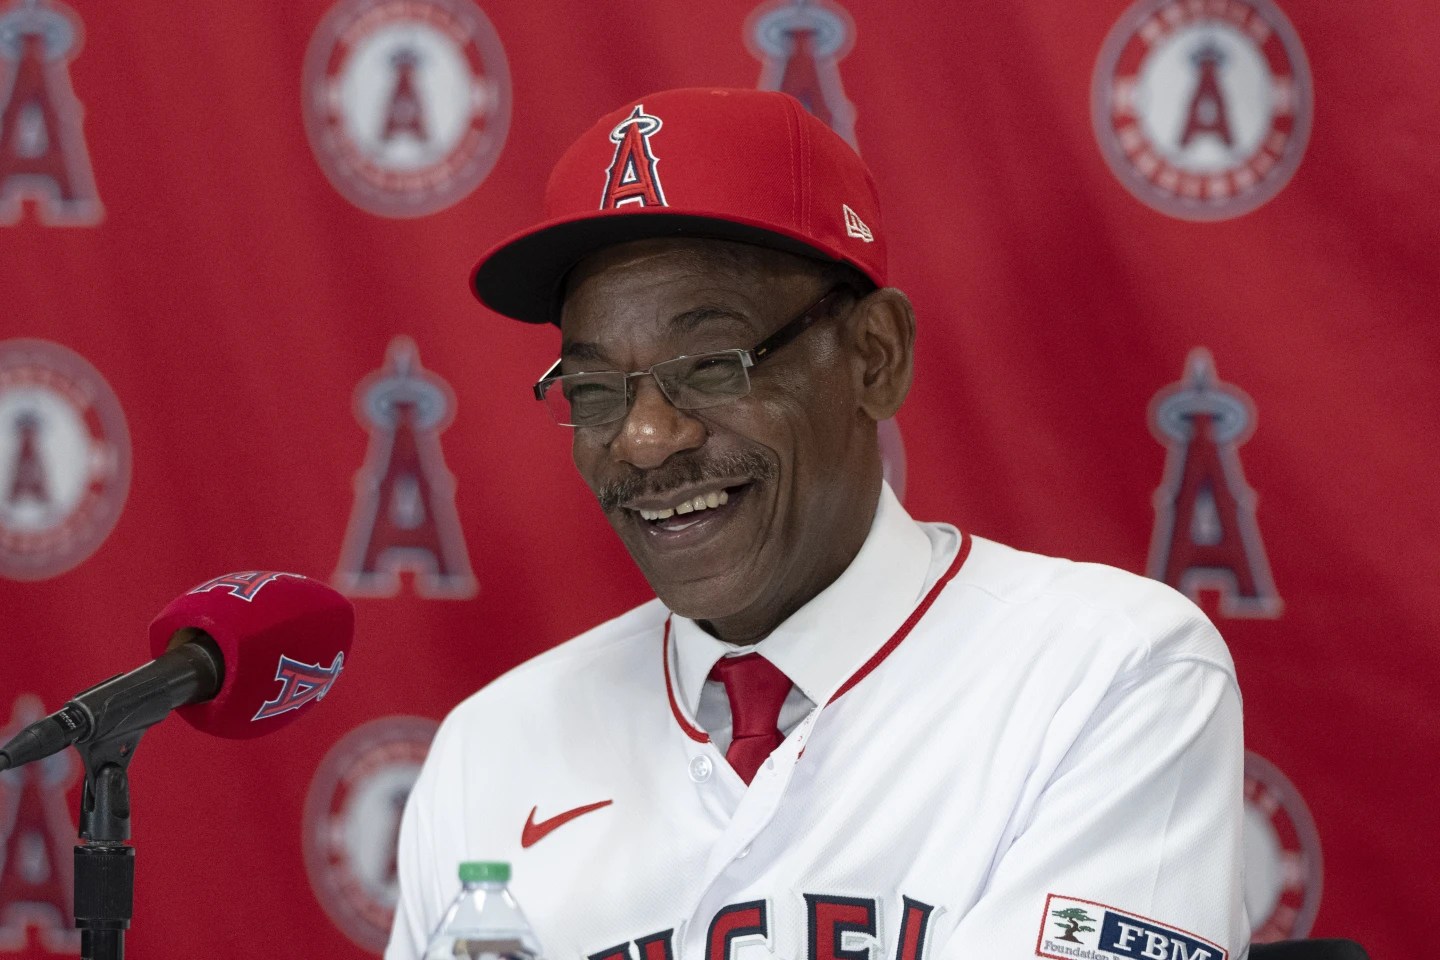 Ron Washington, 71, takes over as Angels’ manager with youthful vigor, plans to ‘run the West down’